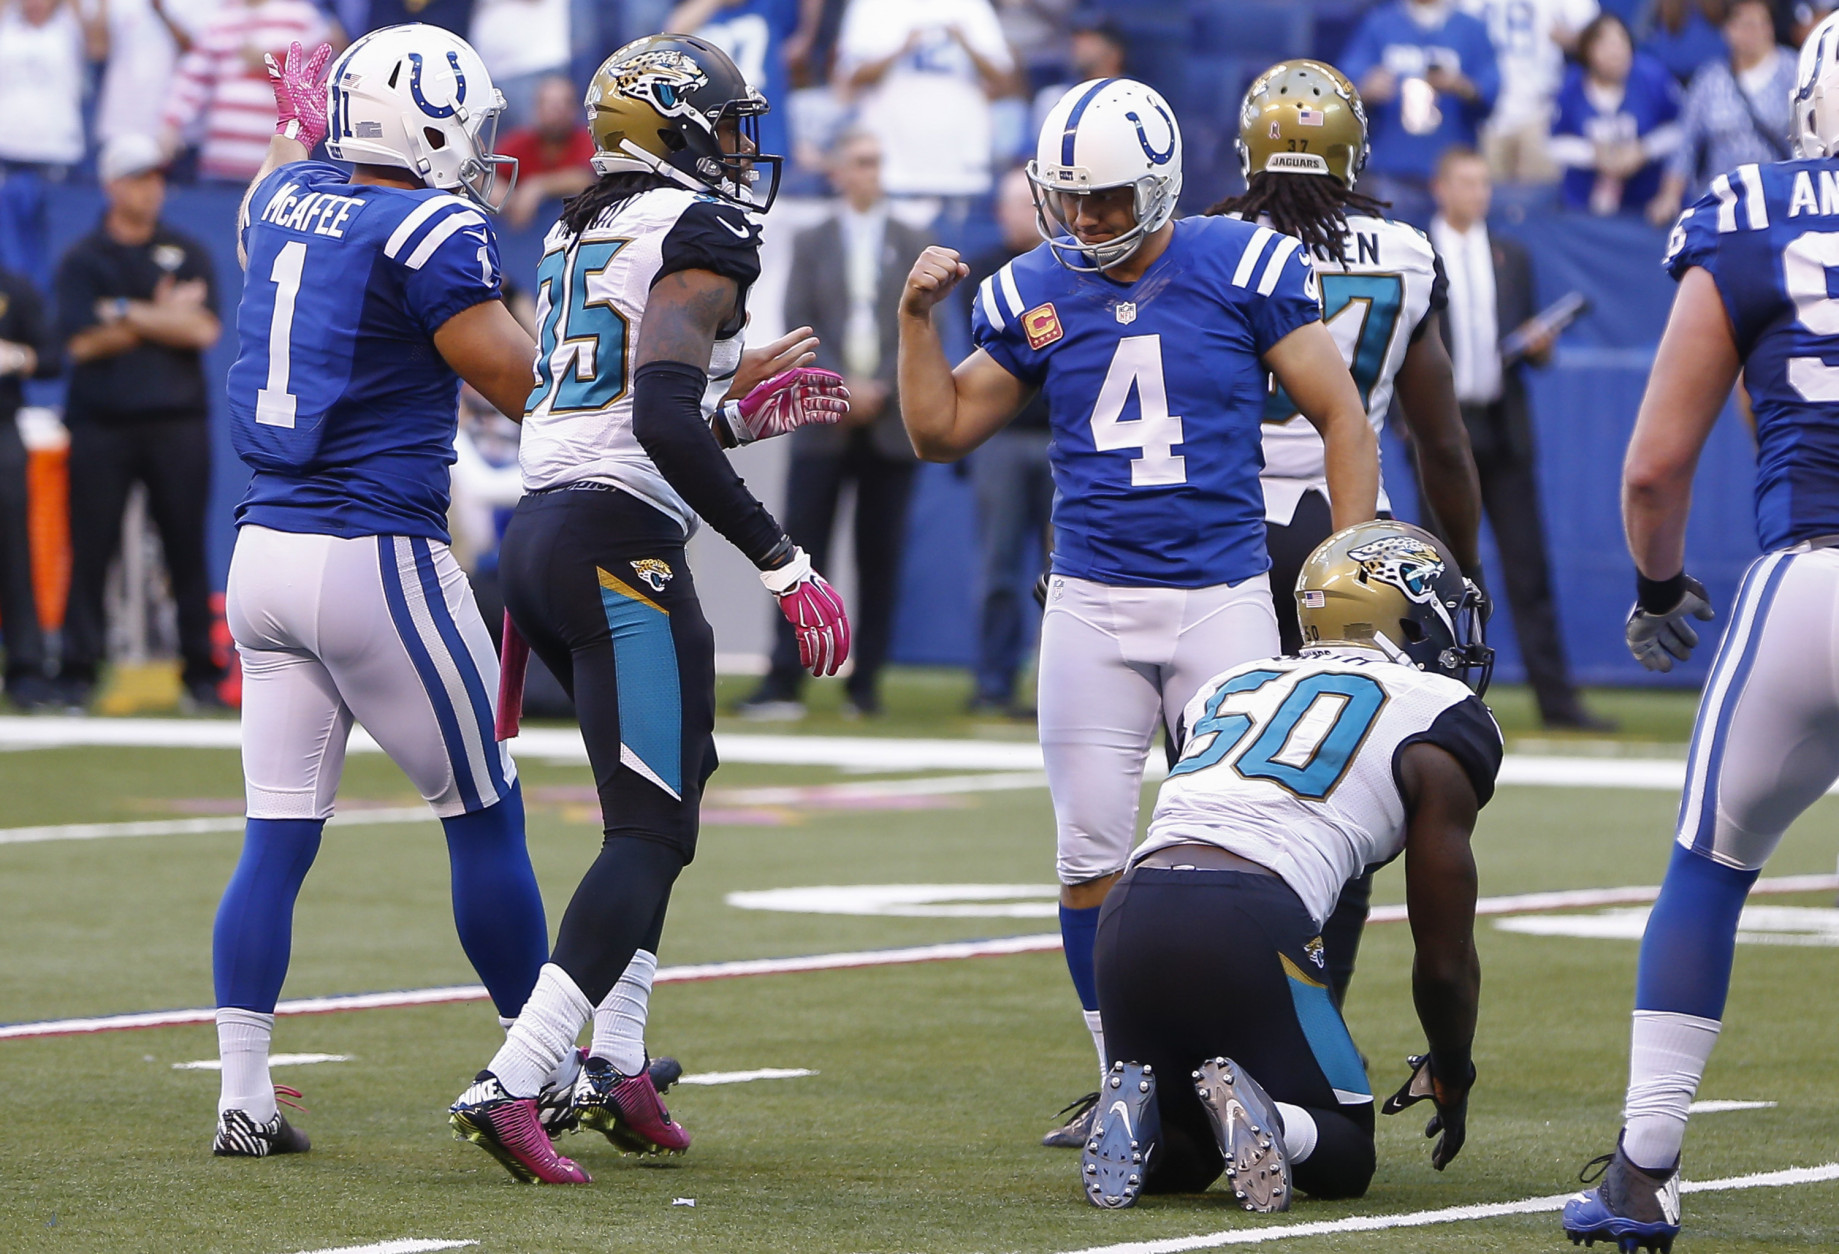 INDIANAPOLIS, IN - OCTOBER 4: Pat McAfee #1 and Adam Vinatieri #4 of the Indianapolis Colts react after the game winning field goal against the Jacksonville Jaguars at Lucas Oil Stadium on October 4, 2015 in Indianapolis, Indiana. Indianapolis defeated Jacksonville 16-13. (Photo by Michael Hickey/Getty Images)